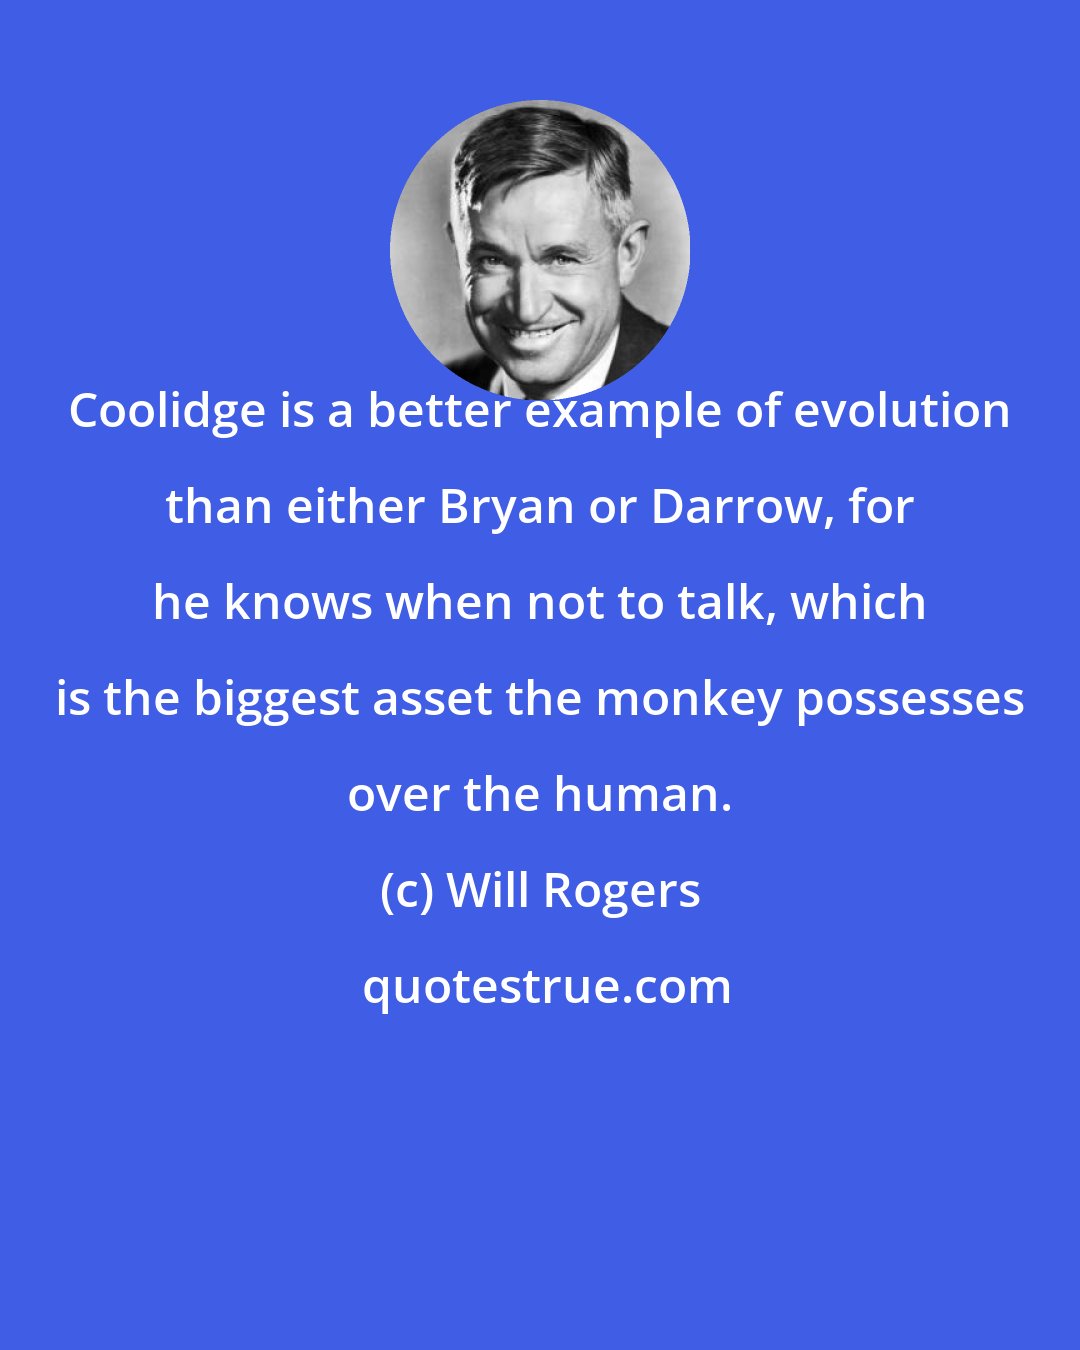 Will Rogers: Coolidge is a better example of evolution than either Bryan or Darrow, for he knows when not to talk, which is the biggest asset the monkey possesses over the human.